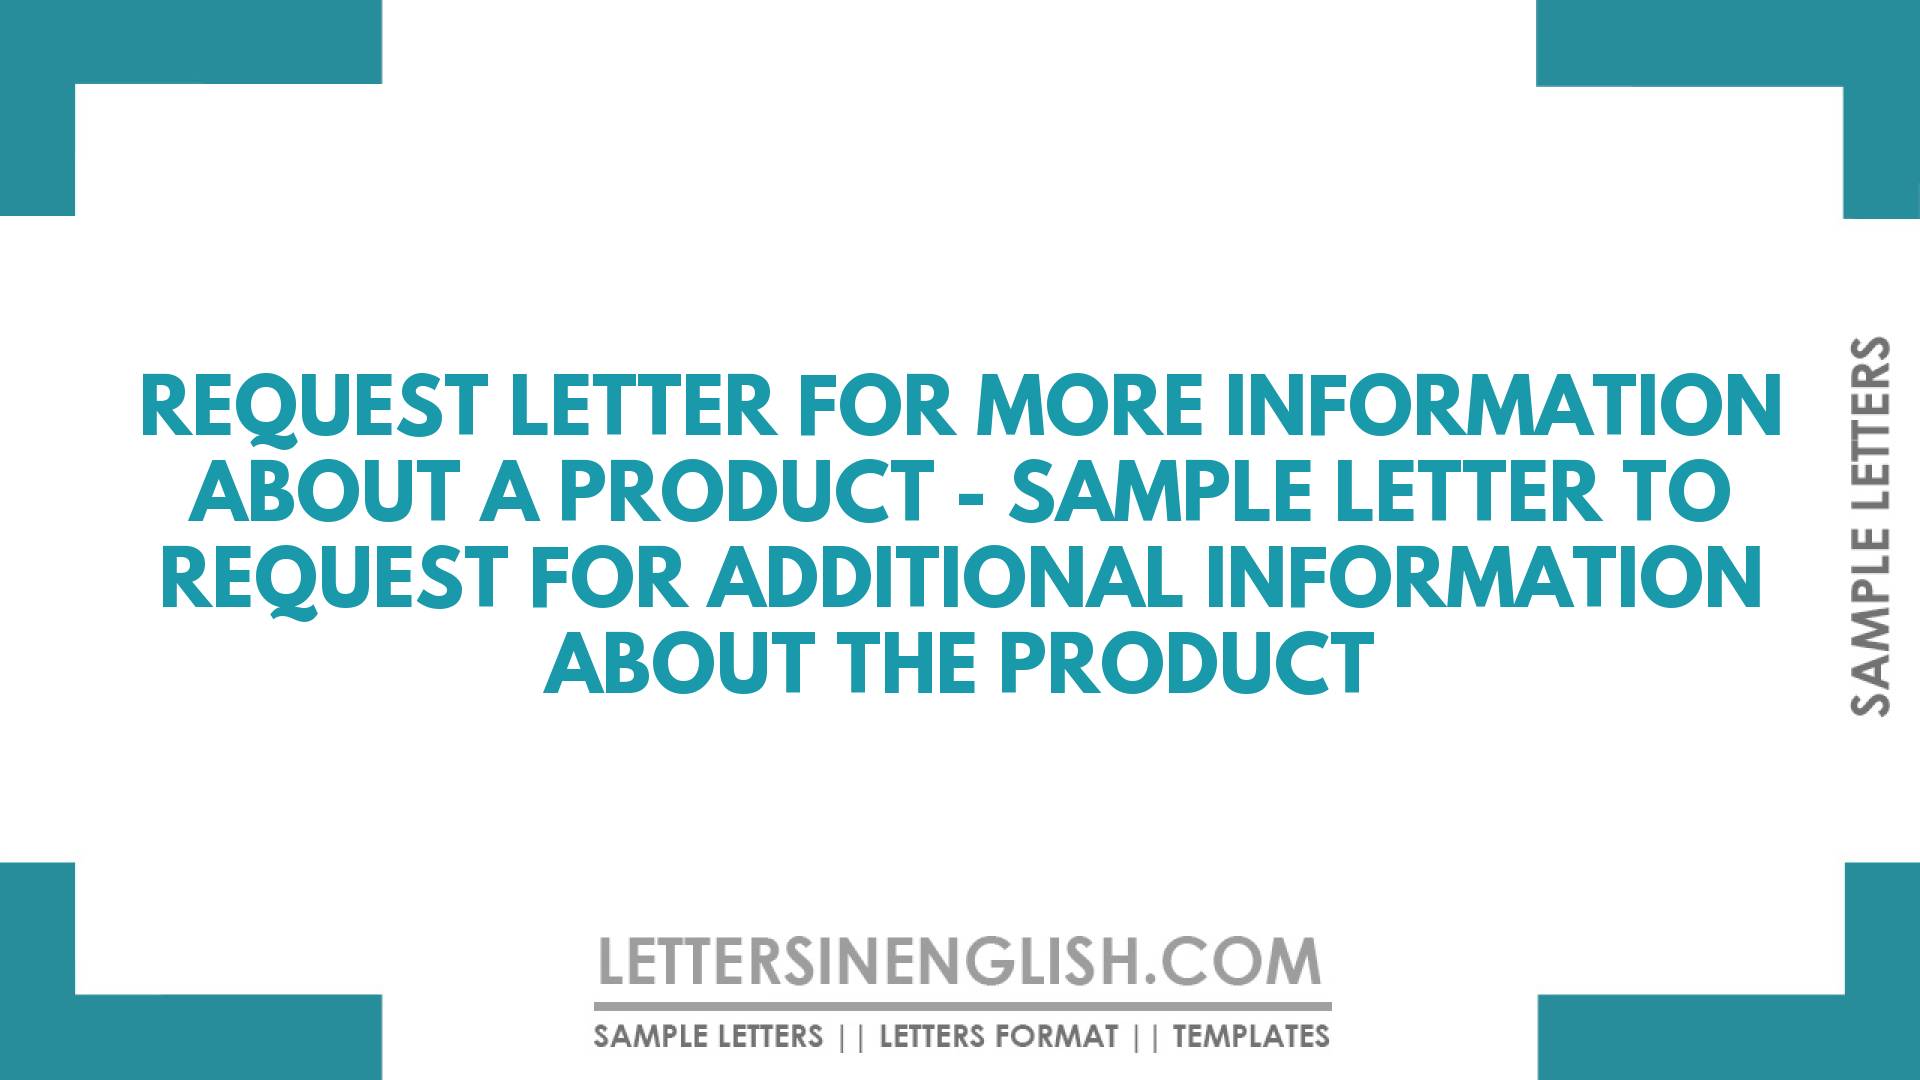 Request Letter for More Information About a Product – Sample Letter to Request for Additional Information About the Product